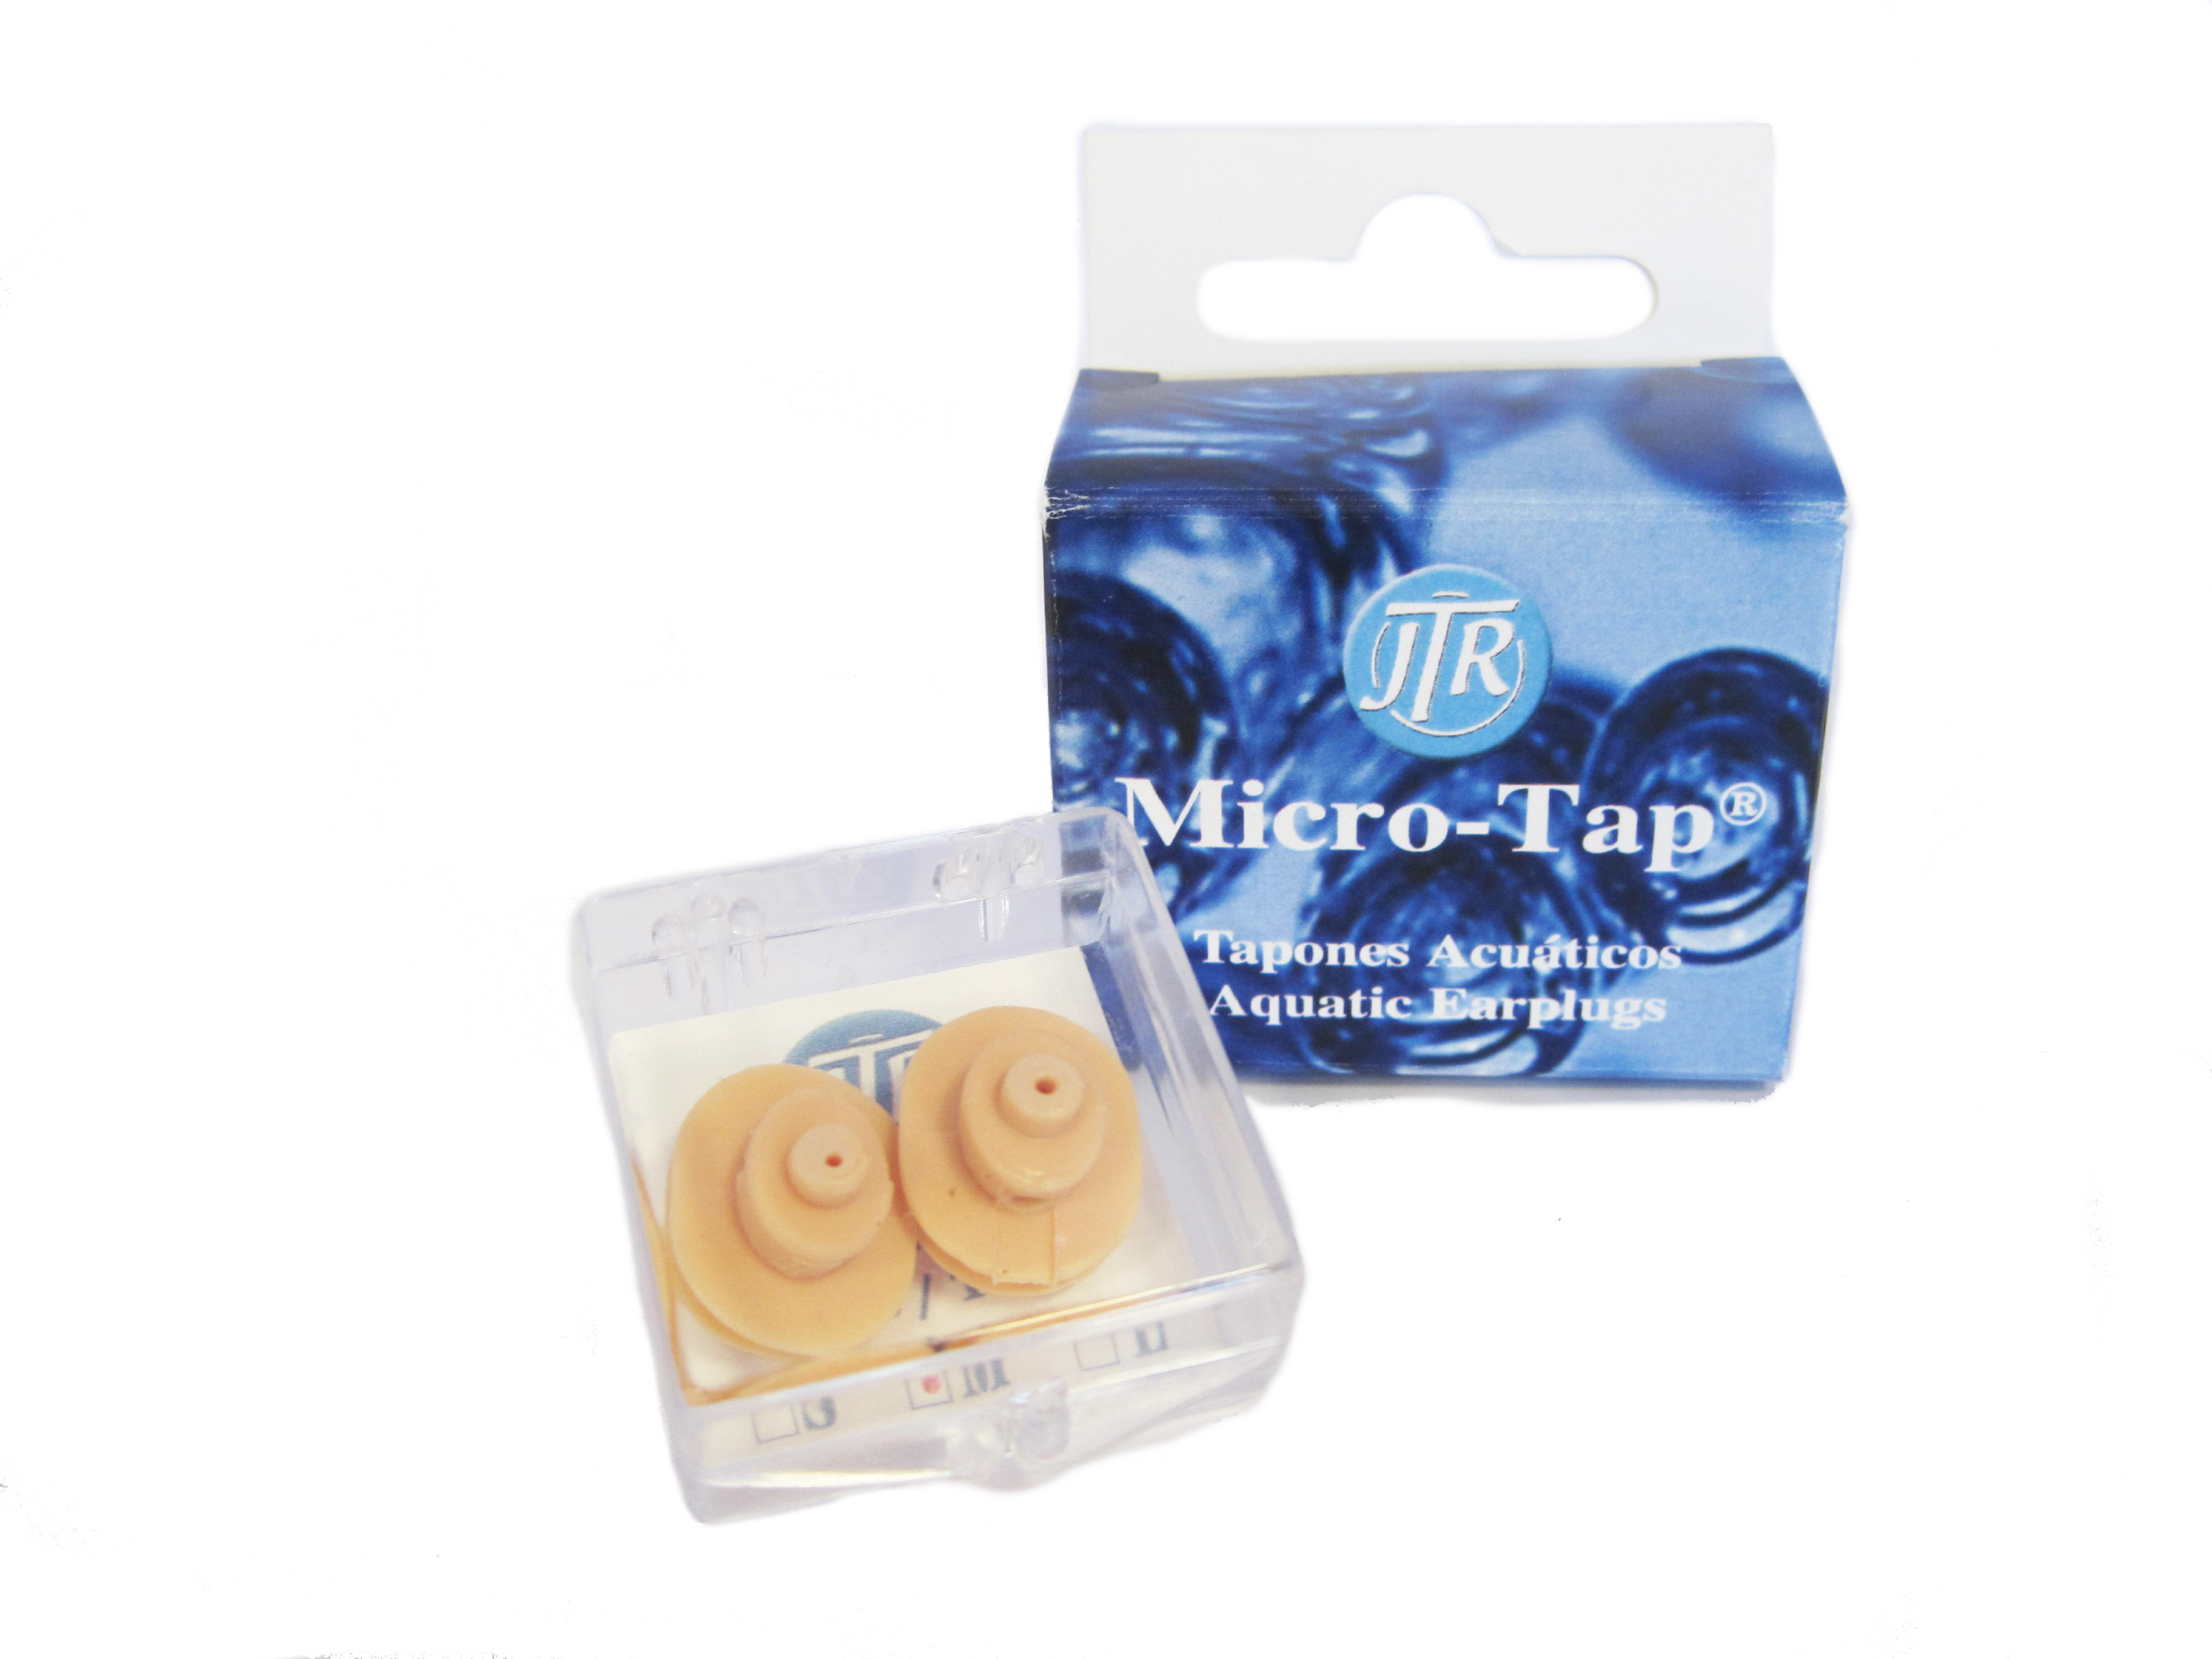 Tapones buceo Micro-Tap